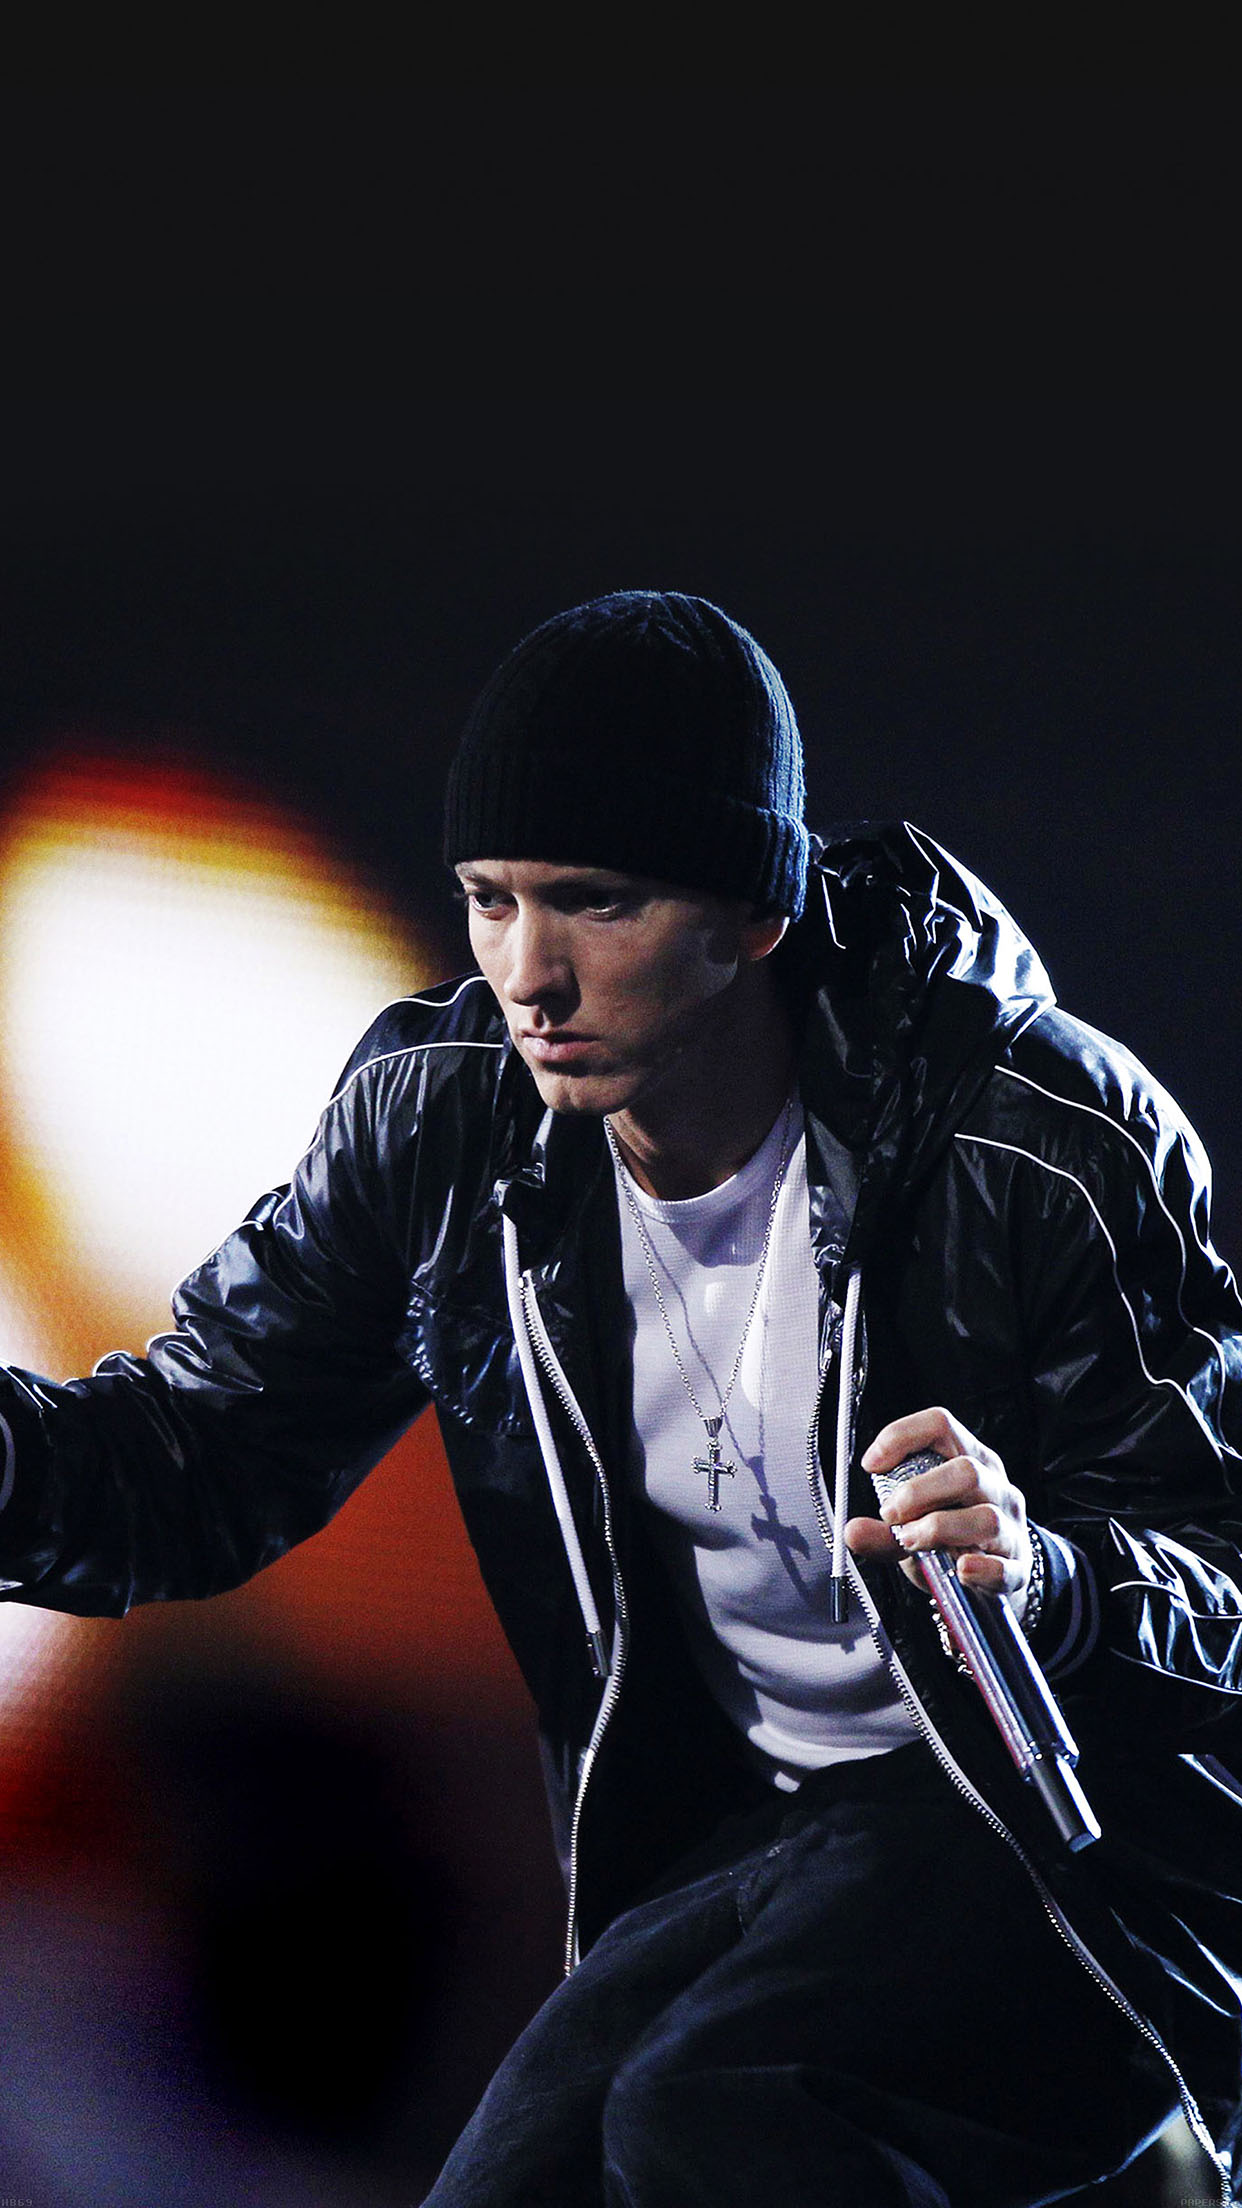 Rapper Wallpapers For Iphone Ultra Hd Eminem 178173 Hd Wallpaper Backgrounds Download Triangle light art iphone wallpaper. rapper wallpapers for iphone ultra hd eminem 178173 hd wallpaper backgrounds download